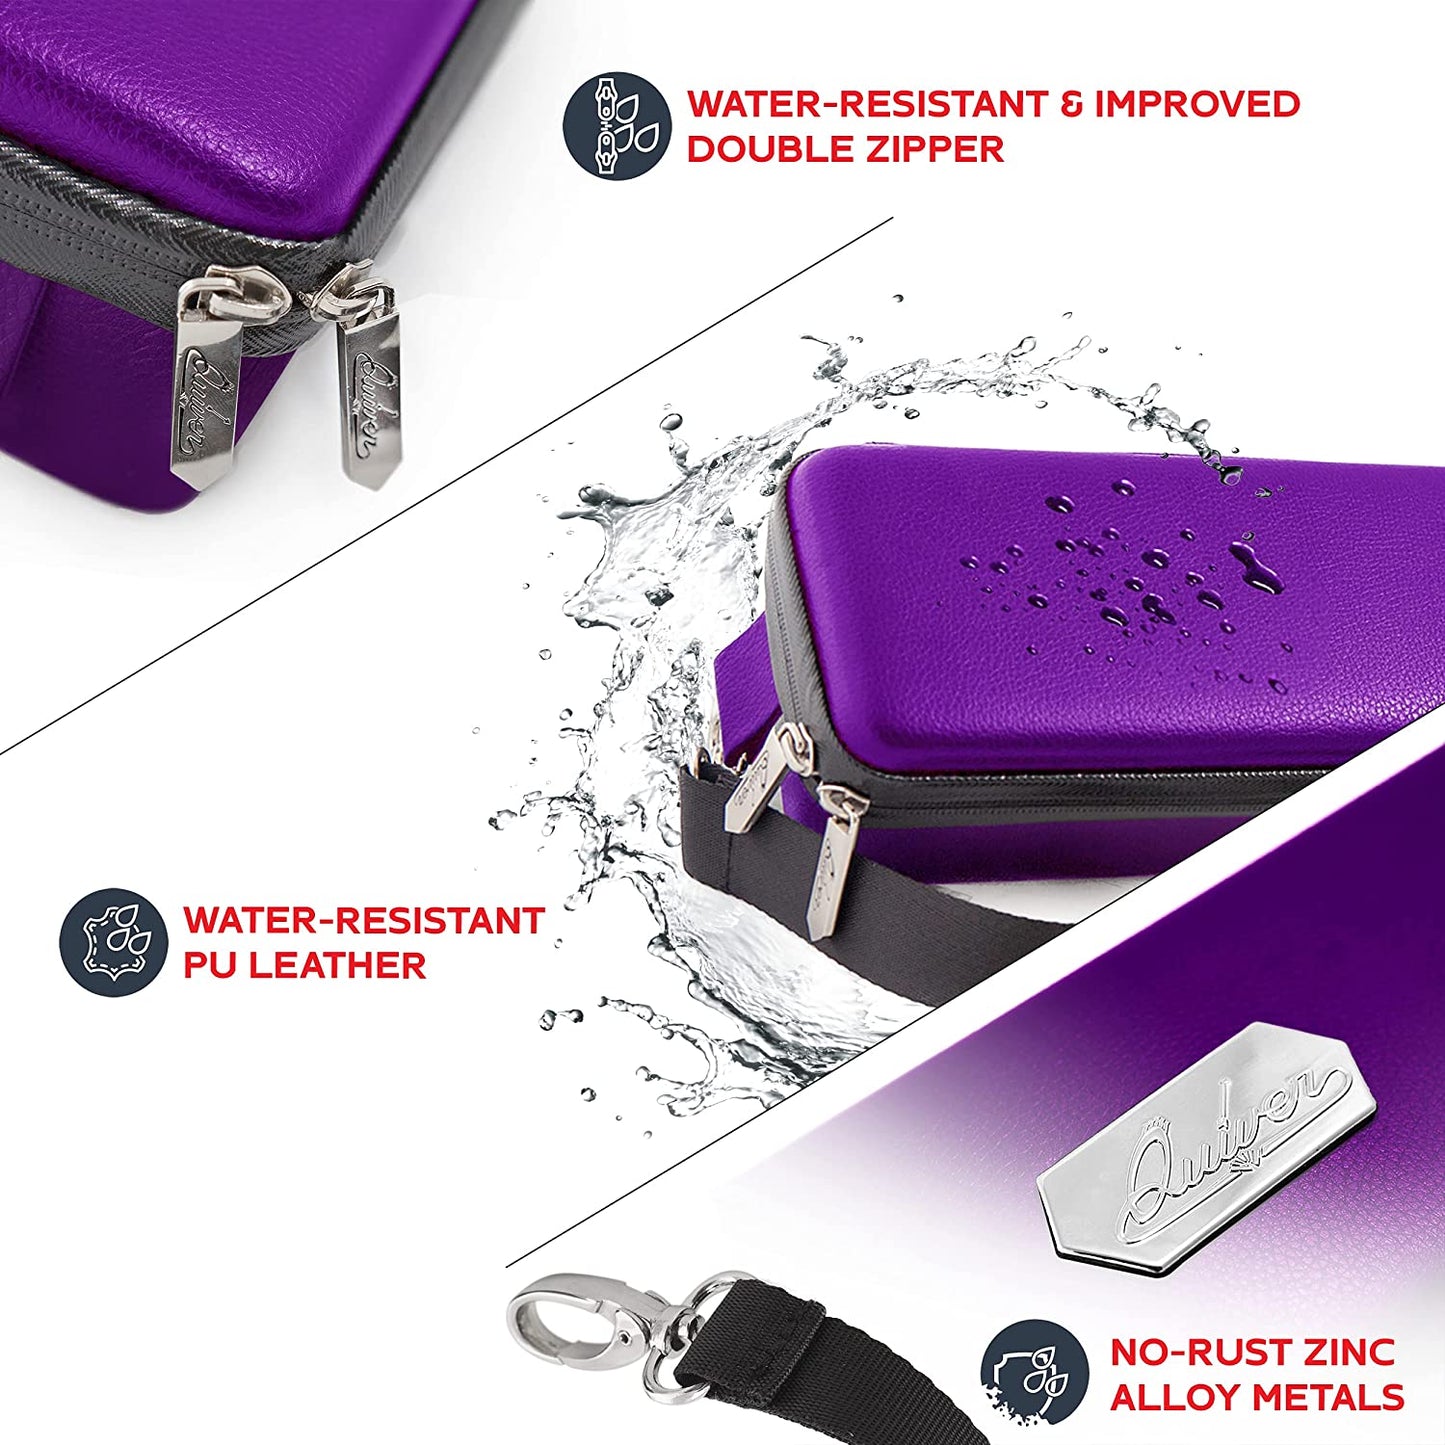 Quiver Time Purple Bolt Collector Card Carrying Case ~ Card/Deck Storage Case with Wrist and Shoulder Strap, Dividers & Separators, Corner Pads + 100 Apollo Card Sleeves ~ Deck Box Bag Compatible